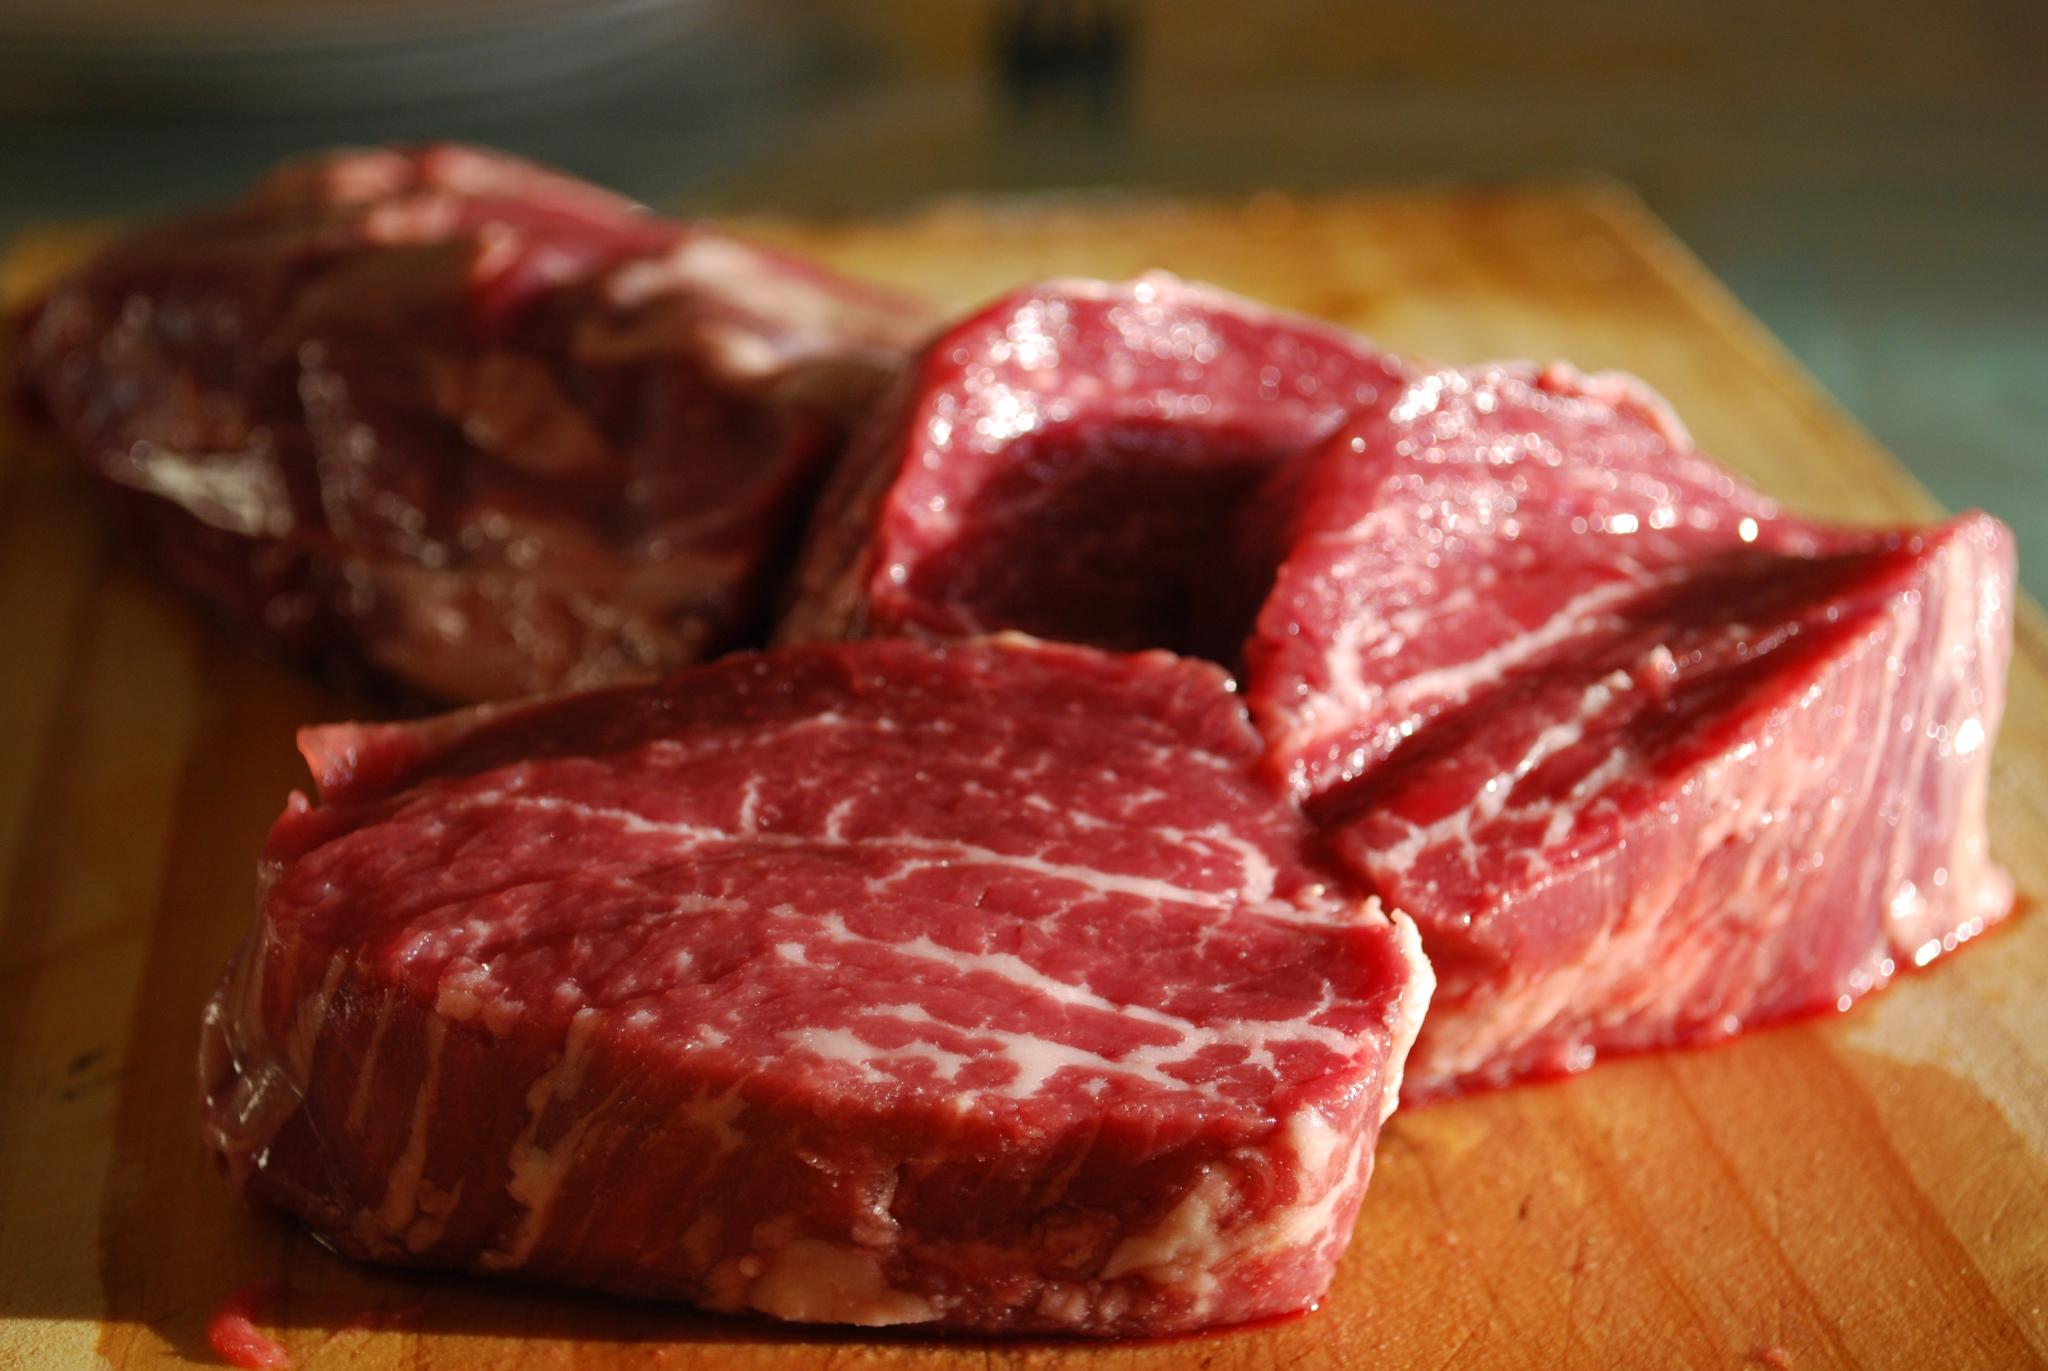 Raw steaks of beef, on wooden surface with black background.